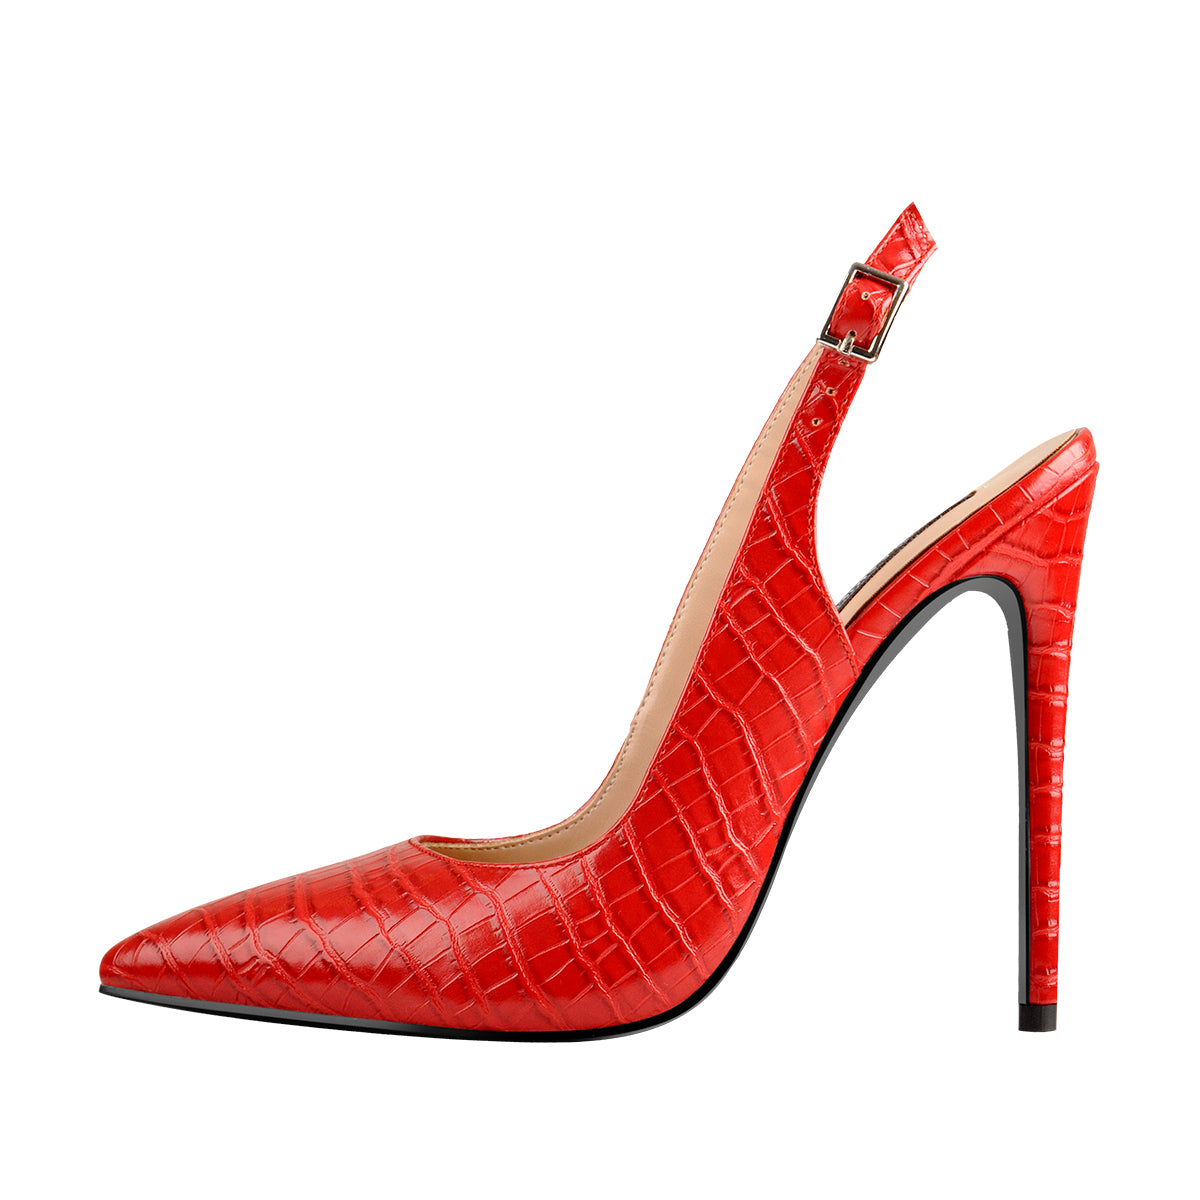 Red Pointed Toe High Heel Sandals Pumps – Onlymaker